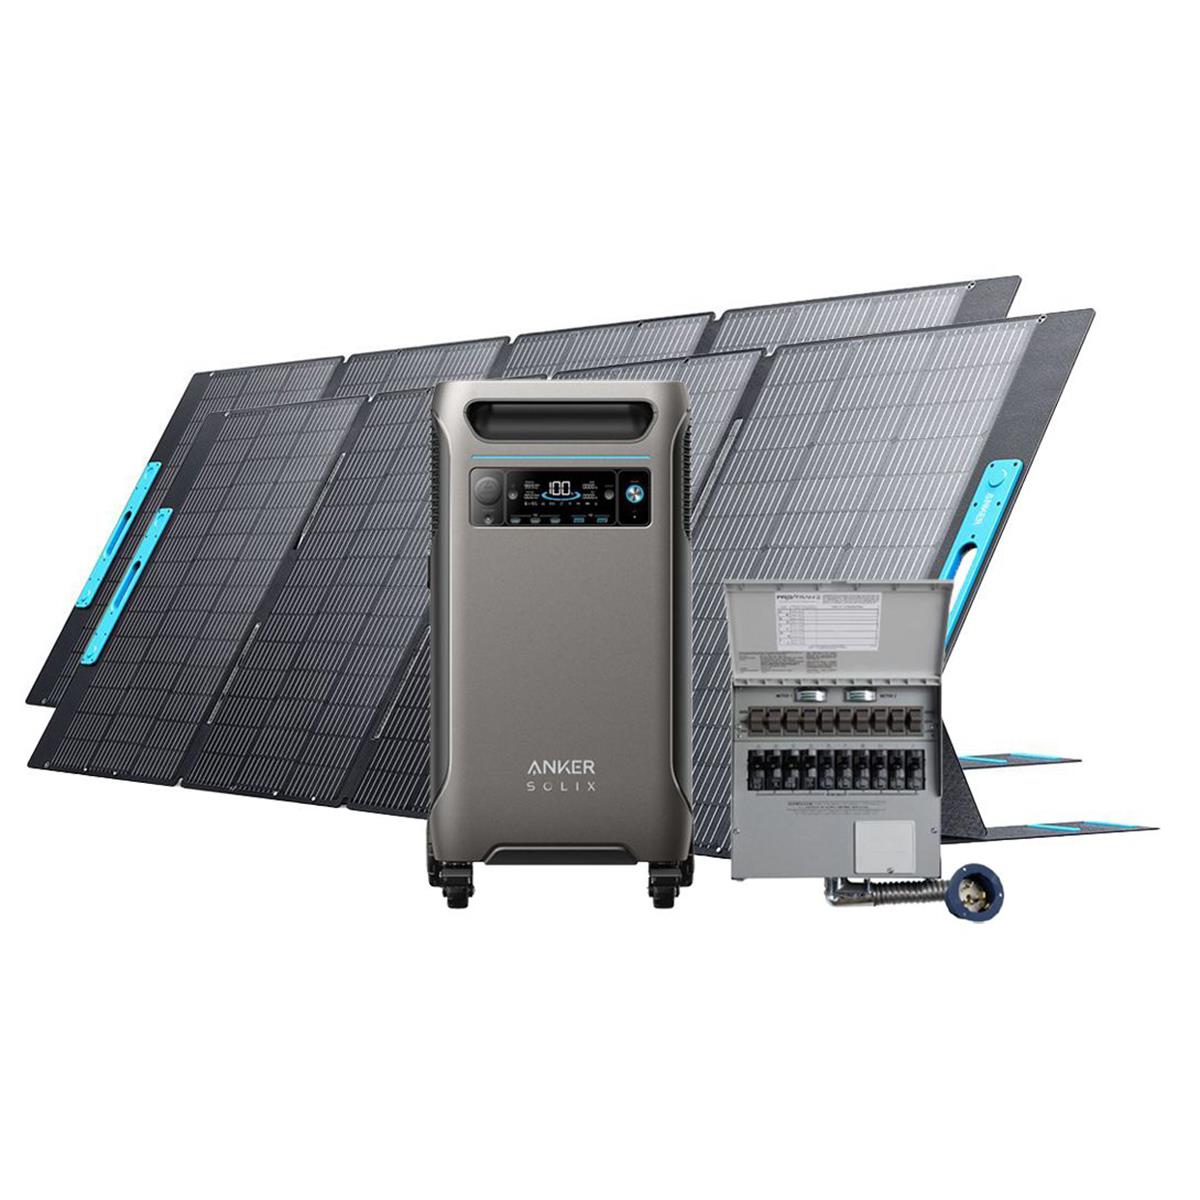 Image of Anker SOLIX F3800 6000W Power Station with Transfer Switch &amp; 2x 400W Solar Panel